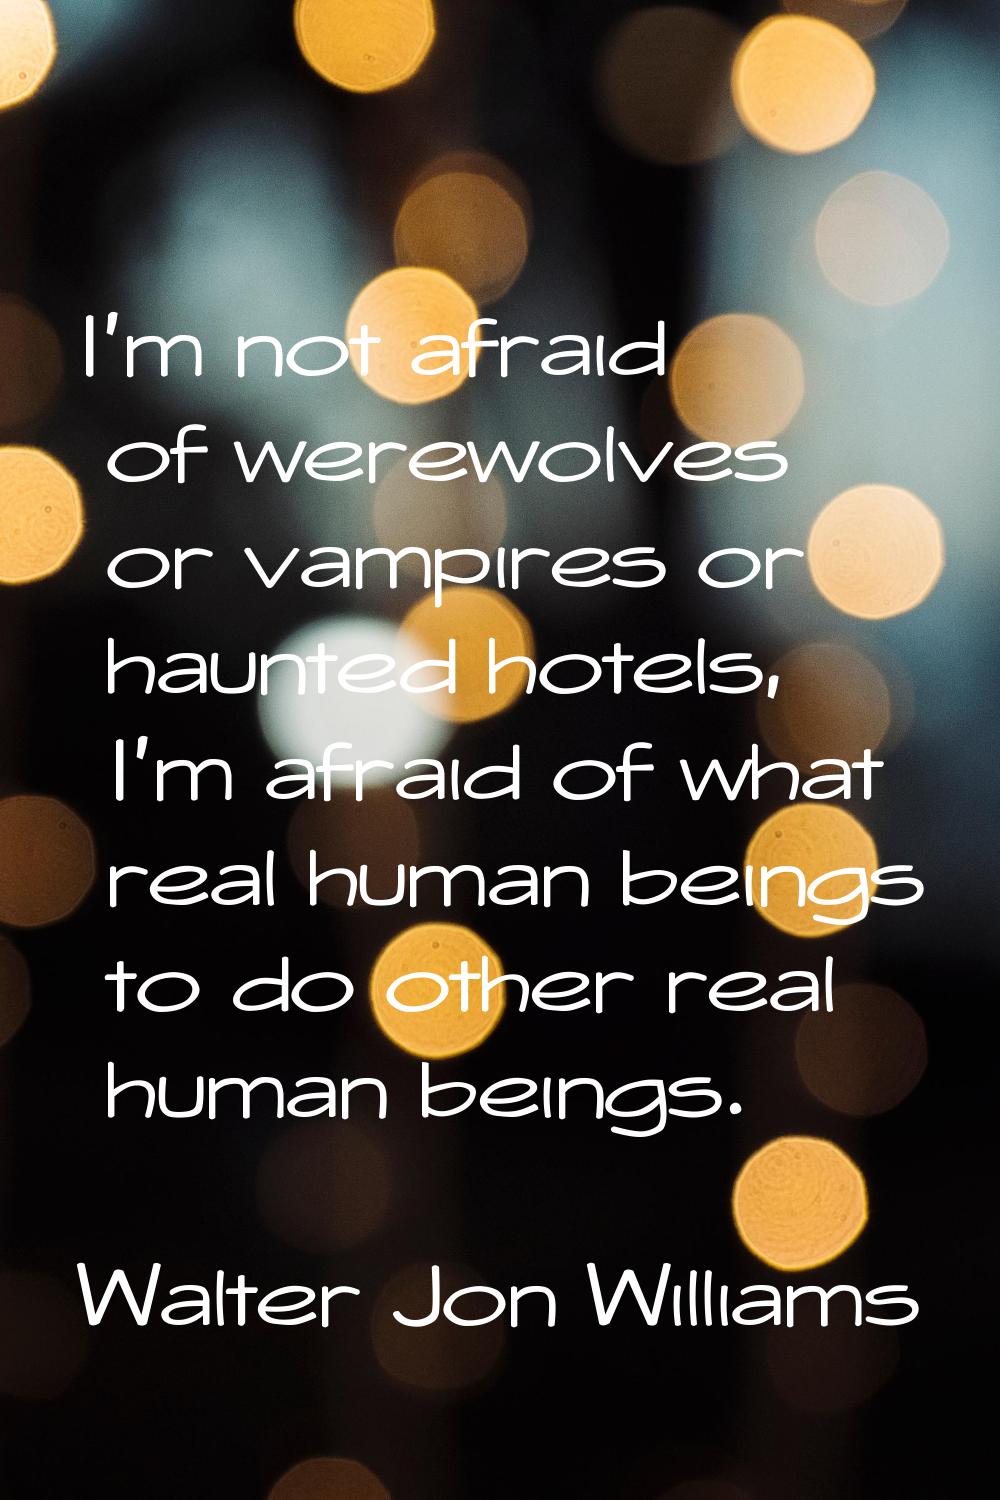 I'm not afraid of werewolves or vampires or haunted hotels, I'm afraid of what real human beings to